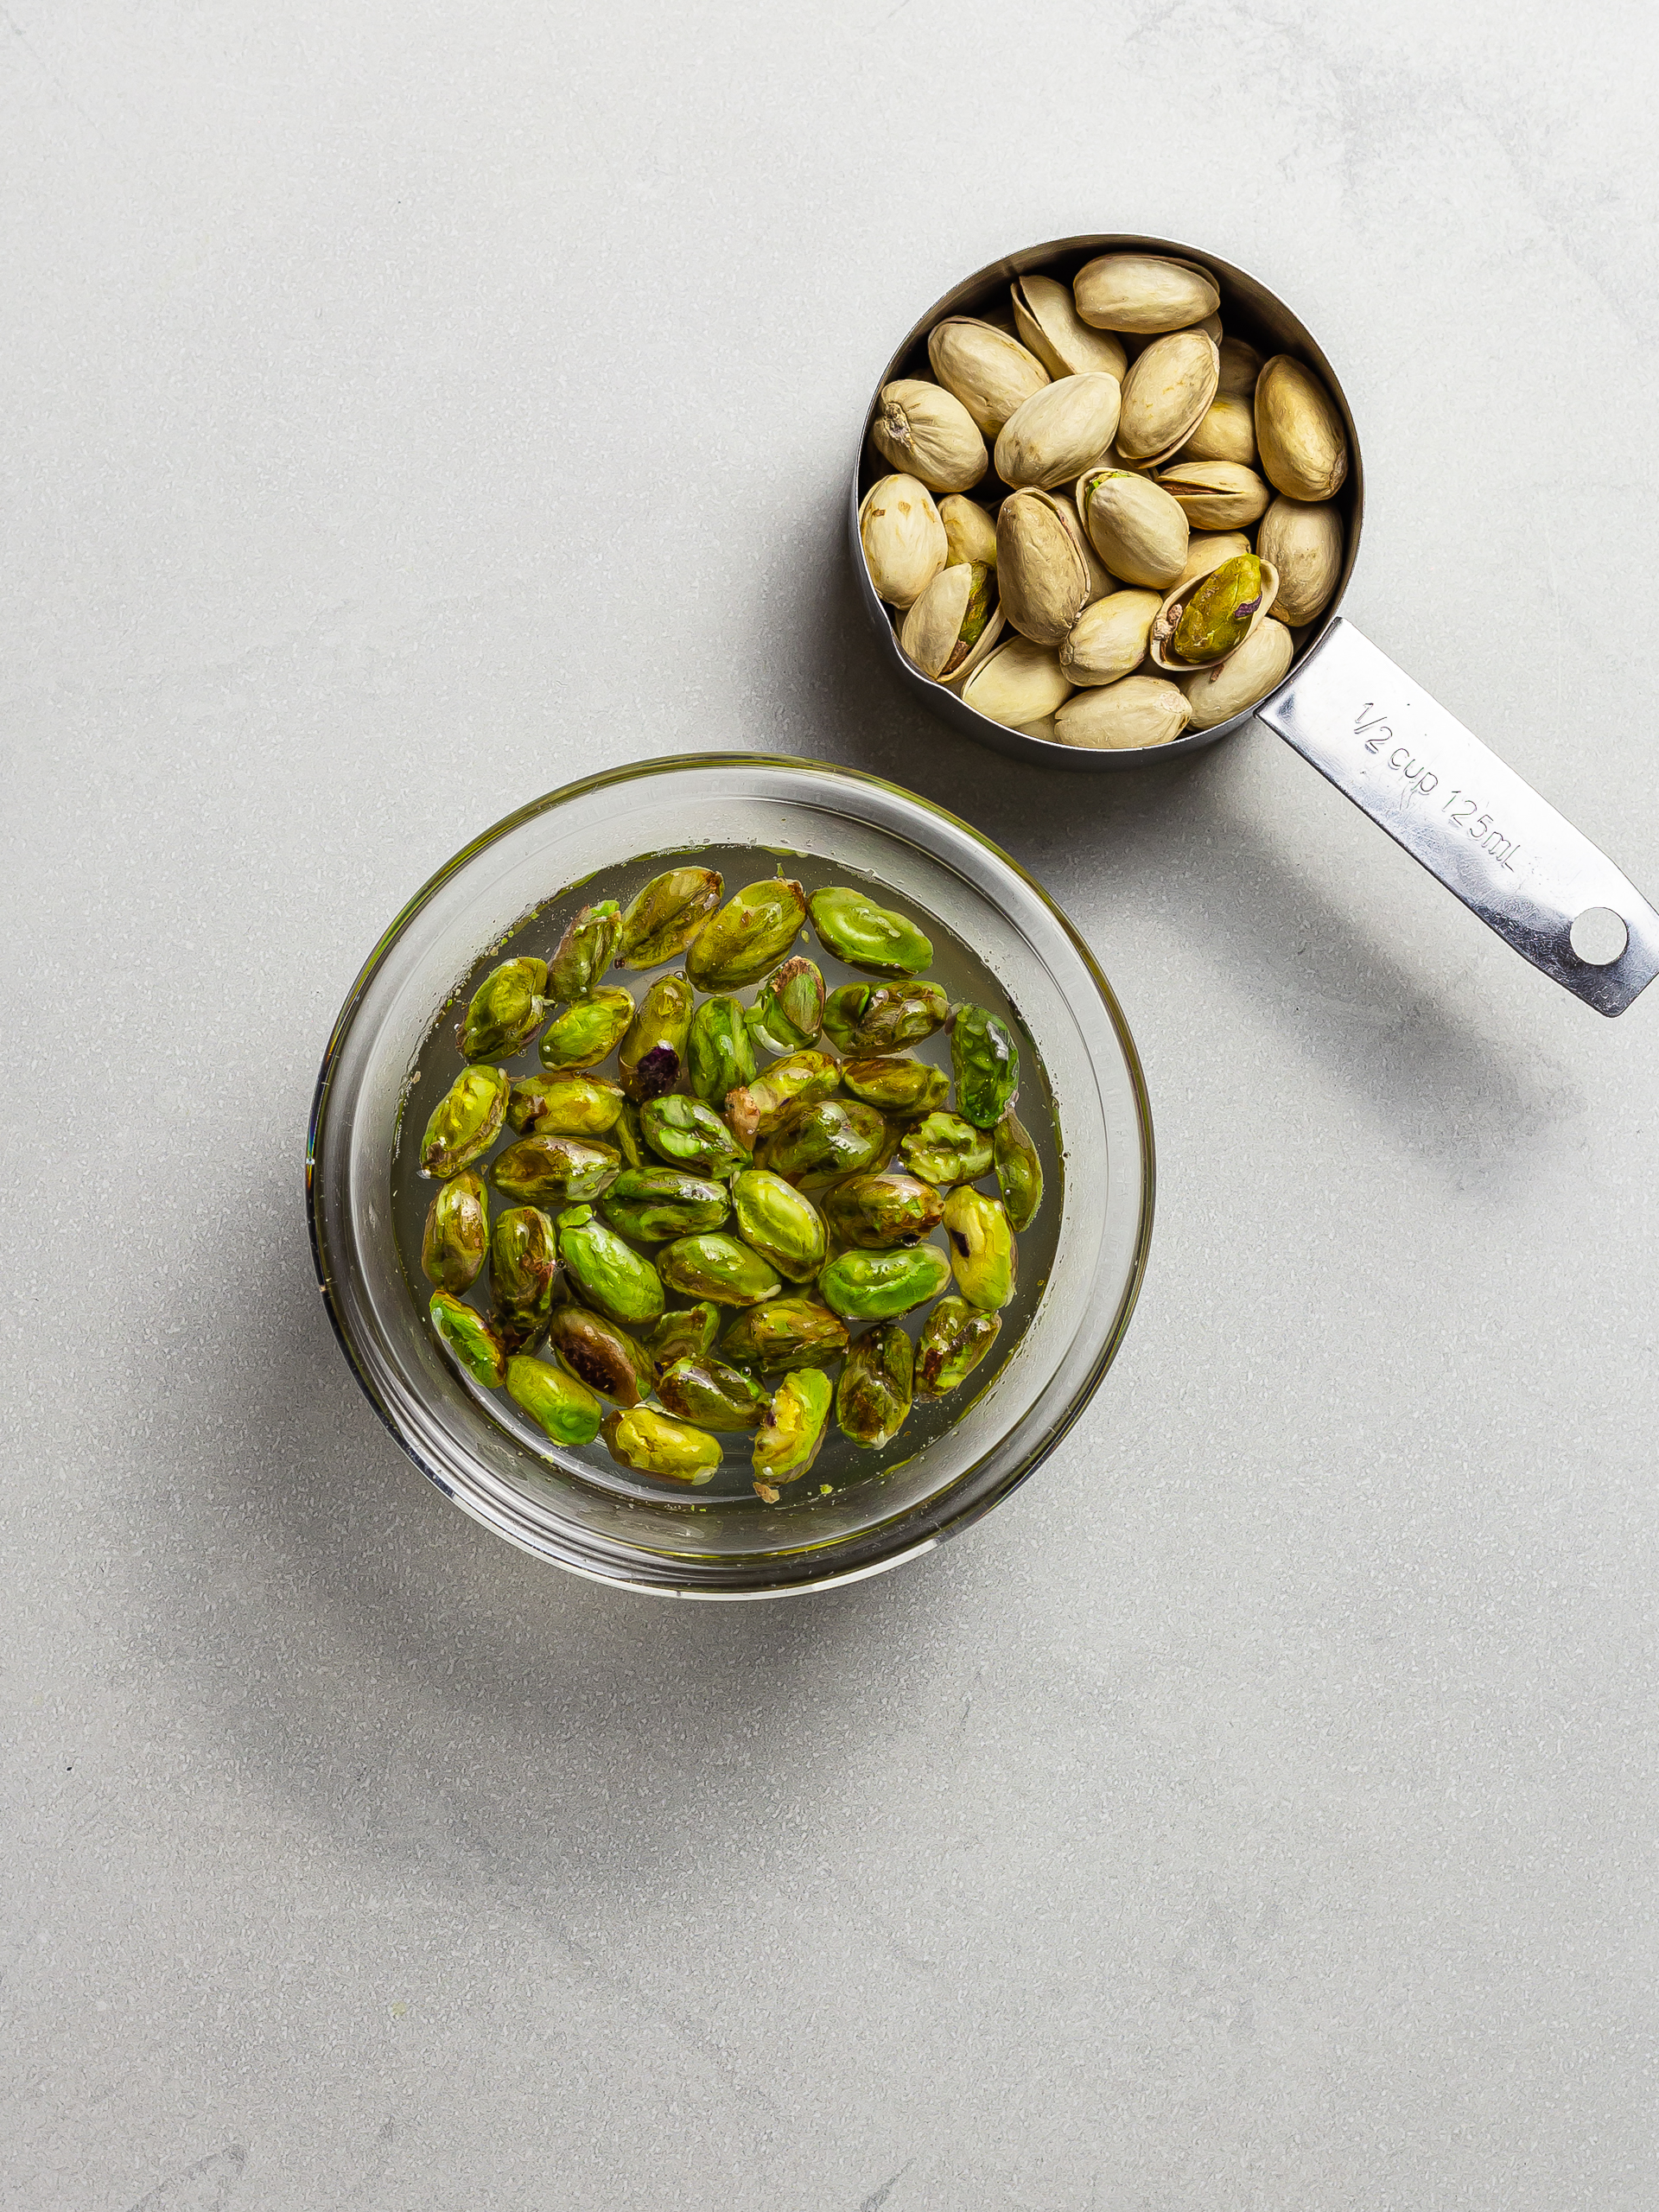 soaked pistachio nuts